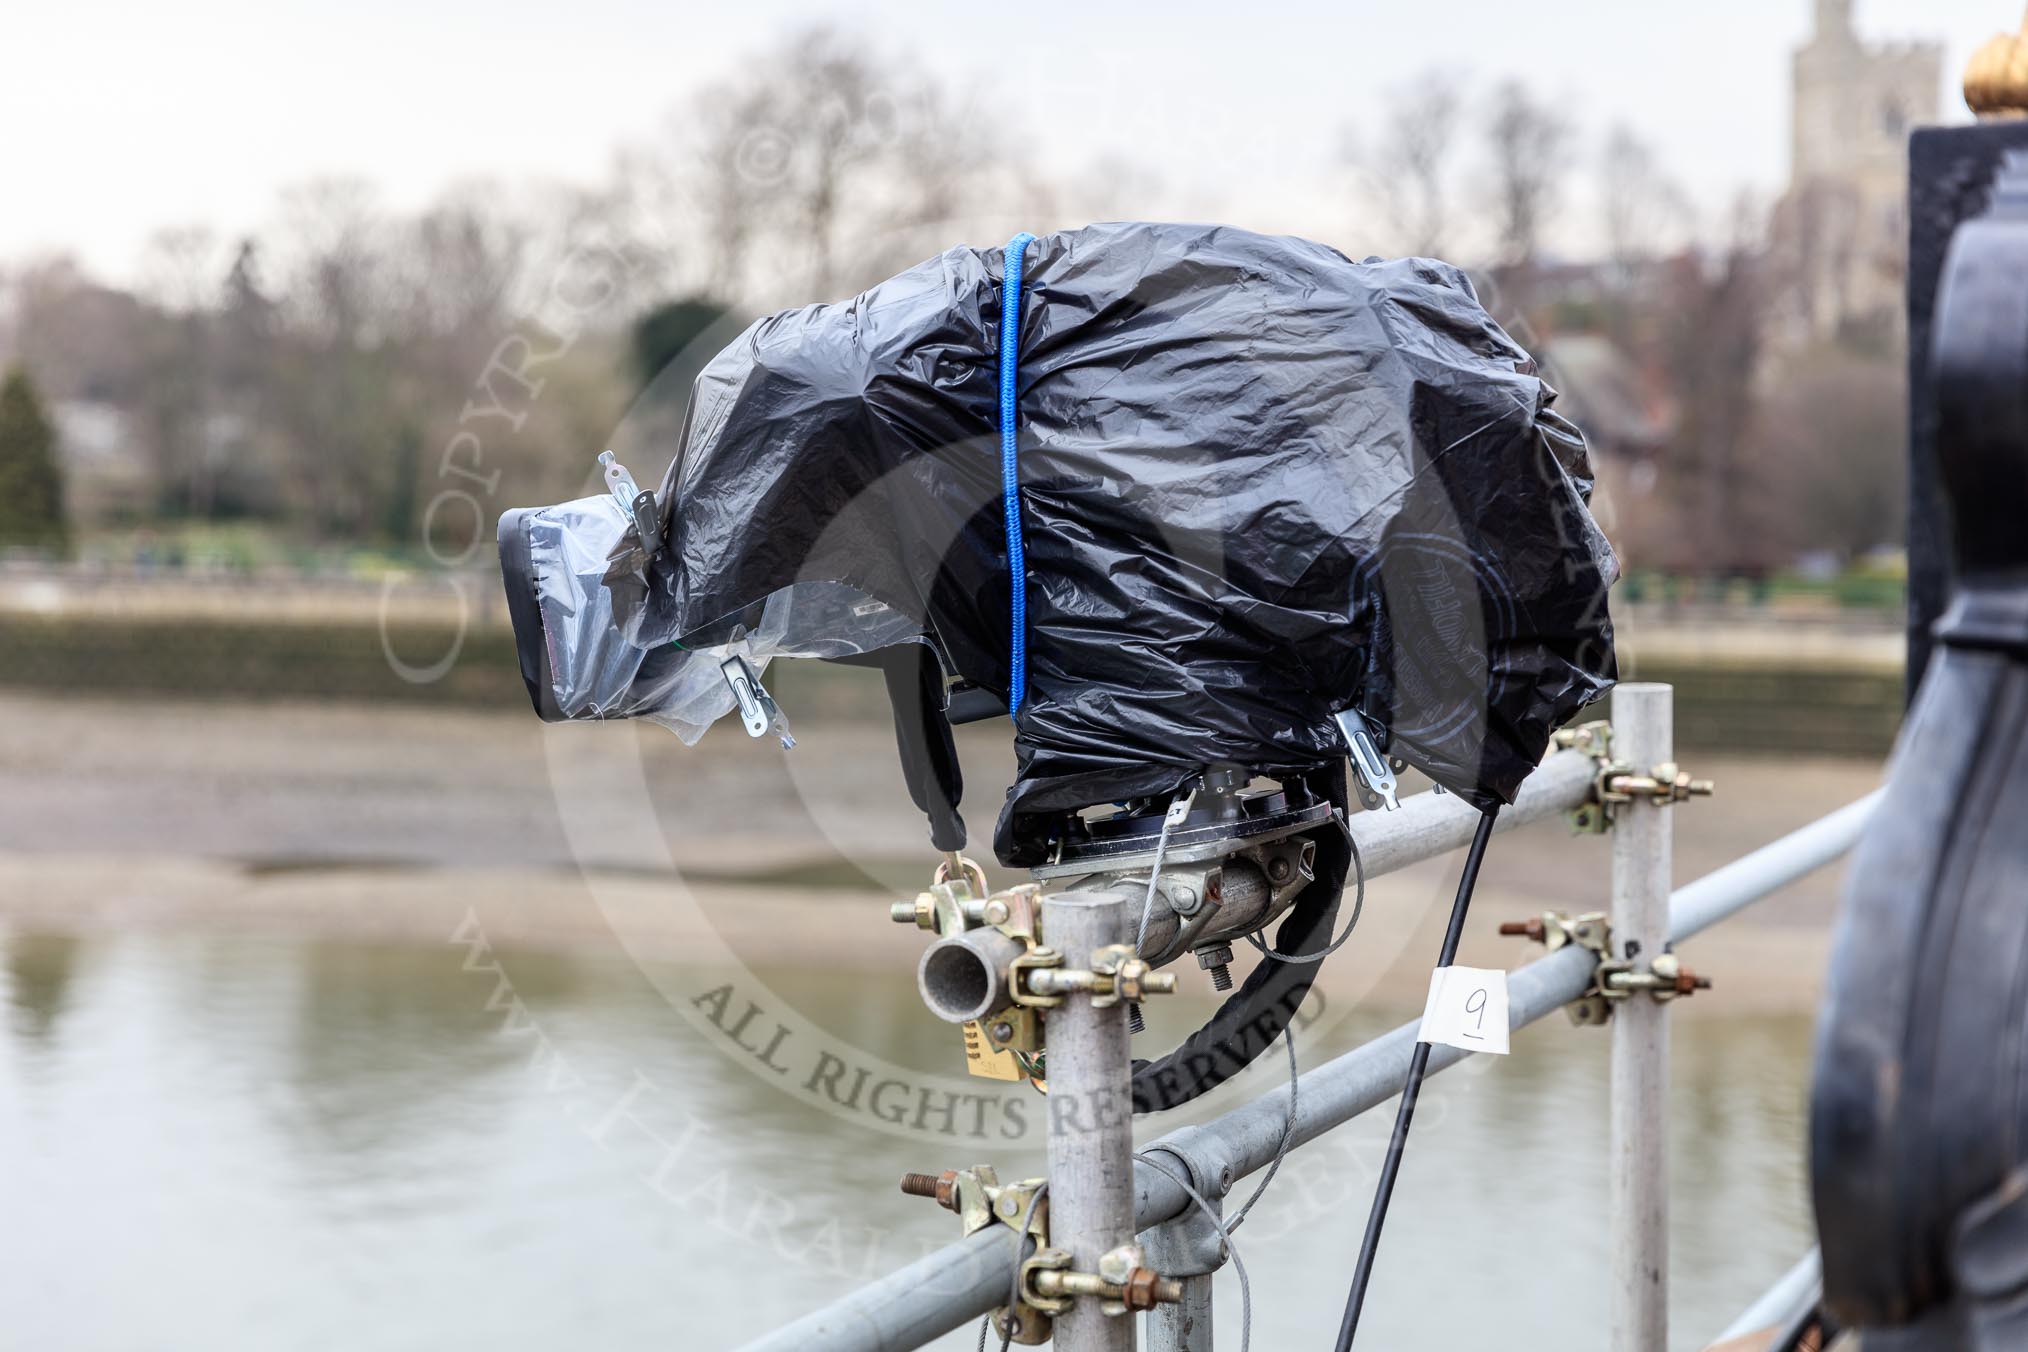 The Cancer Research UK Women's Boat Race 2018: A remote controlled BBC camera at Putney Bridge, overlooking the start area.
River Thames between Putney Bridge and Mortlake,
London SW15,

United Kingdom,
on 24 March 2018 at 13:12, image #5